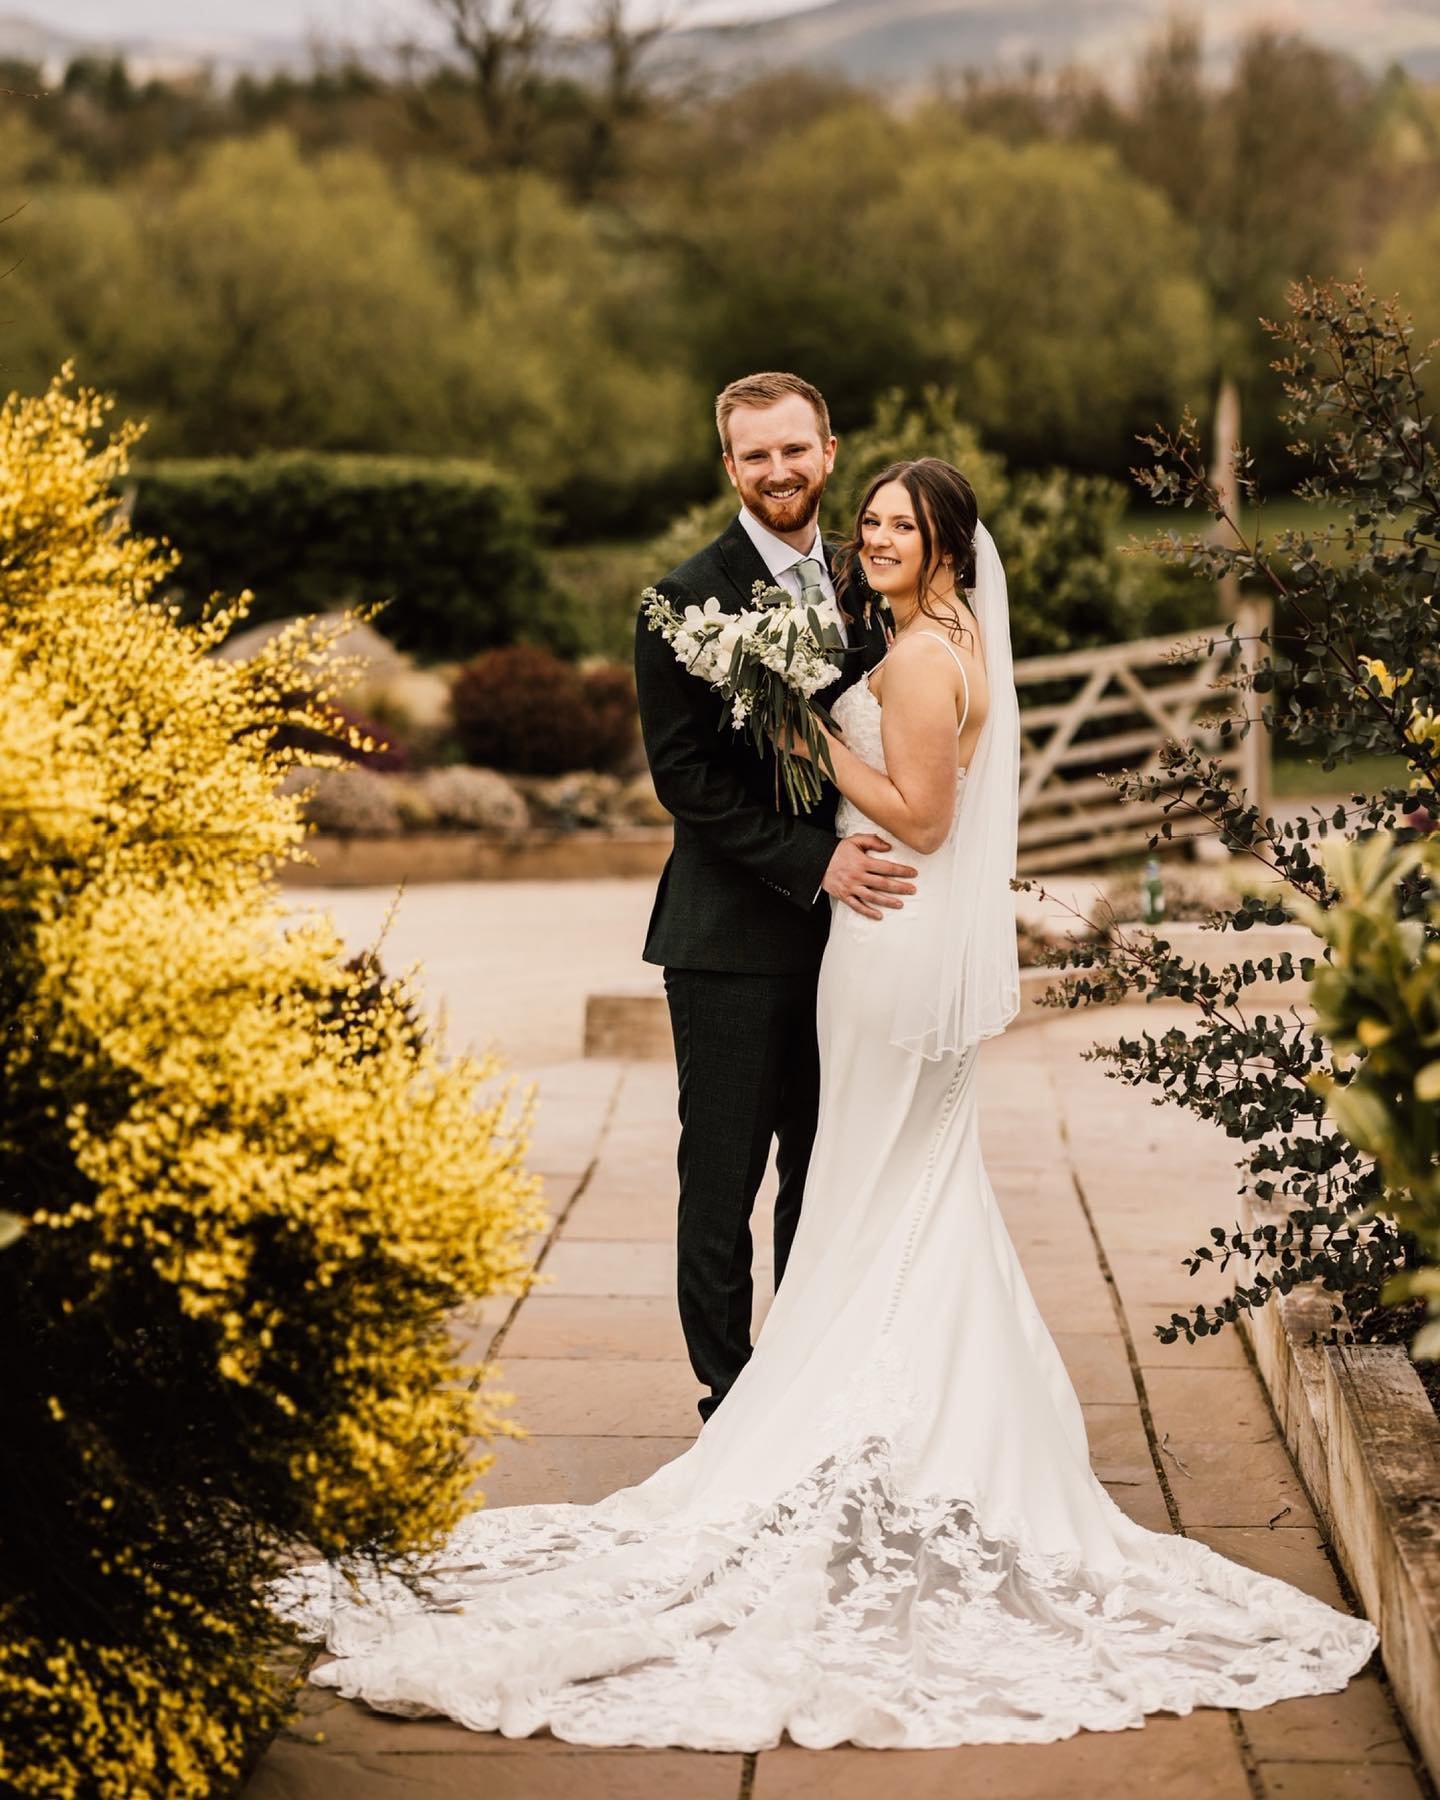 Mel &amp; Oli ❤️

Oh how romantic and gorgeous was Mel &amp; Oli&rsquo;s wedding day last week! 

Forever loving capturing elegant and timeless, yet relaxed and full of feeling, portraits, and all the fun that is happening around you!

Mel &amp; Oli,